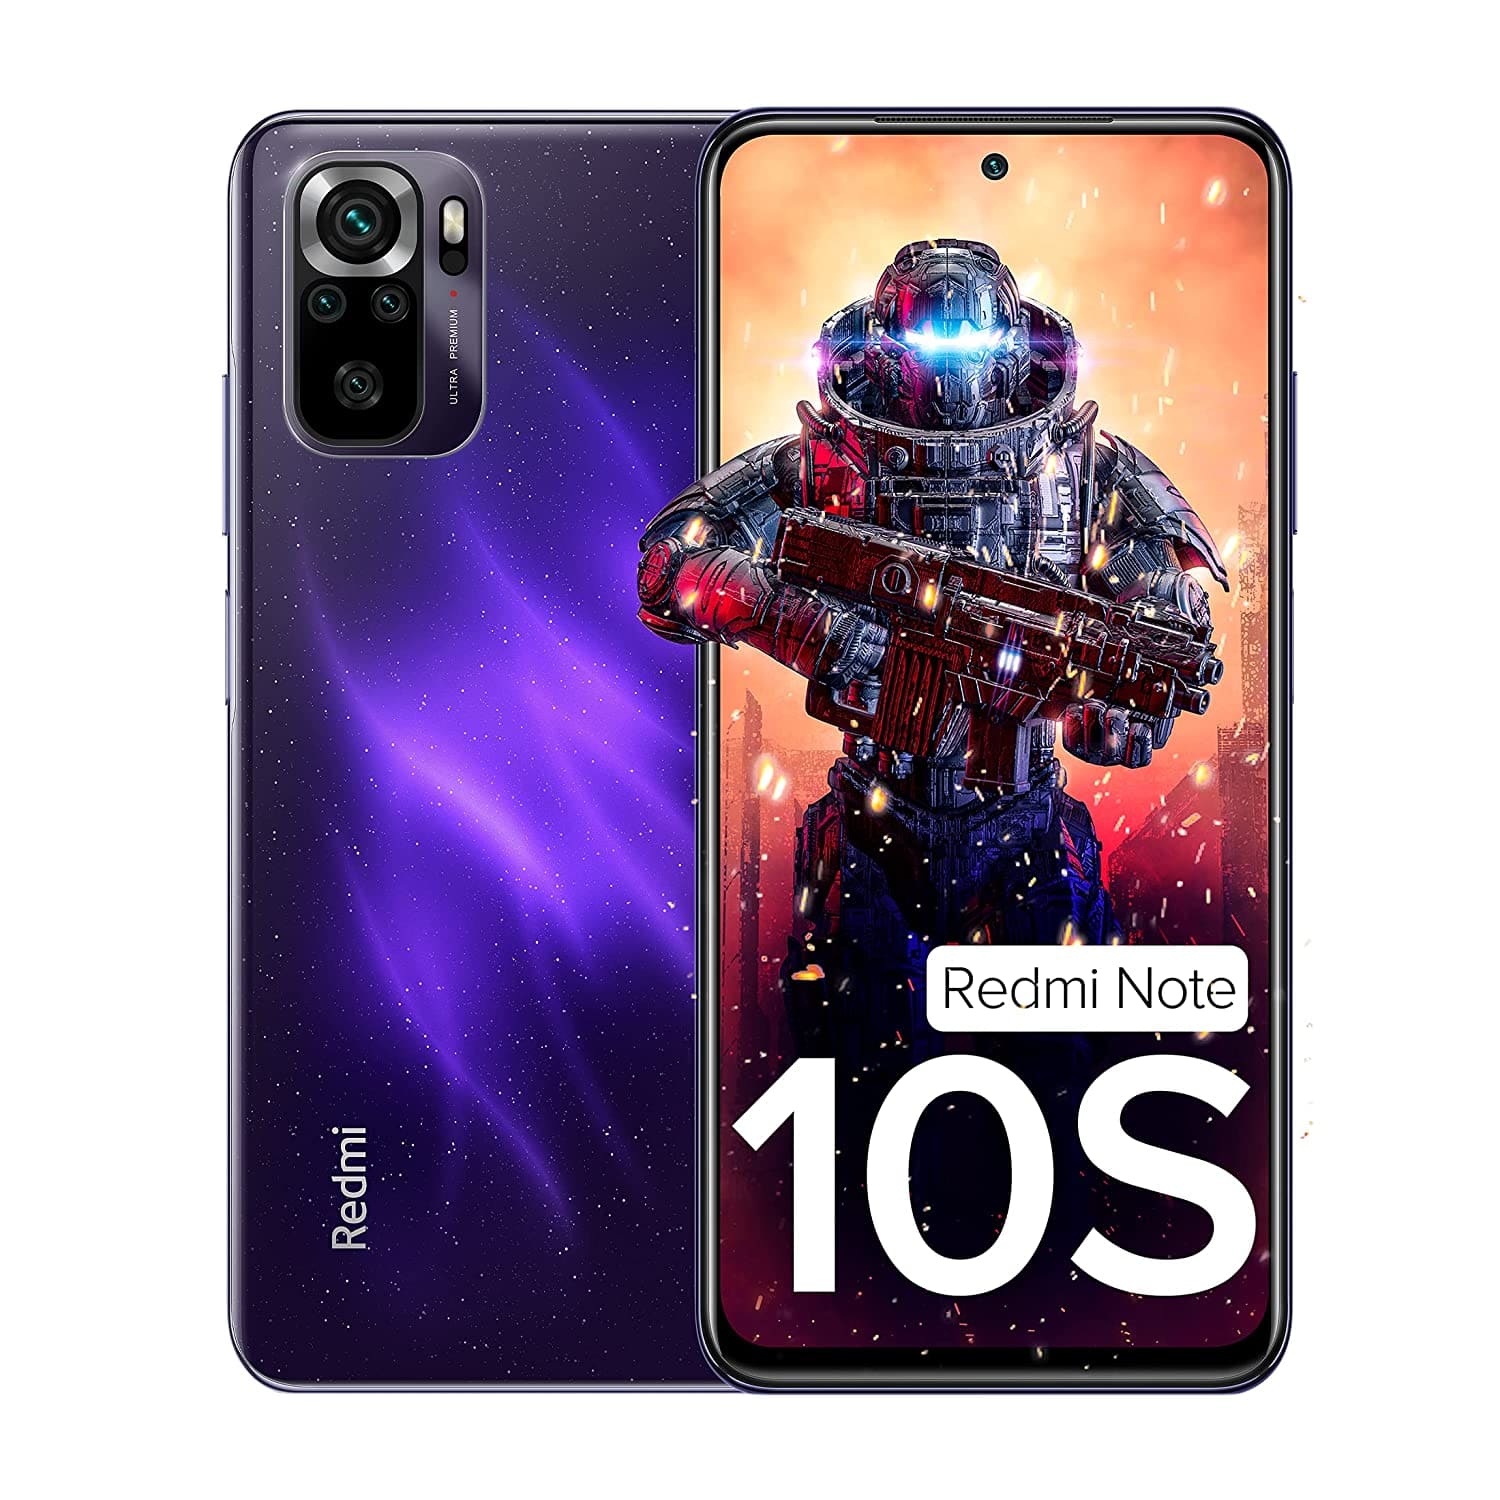 Redmi Note 10S is a best mobile under 20000 for which is used for gaming purpose